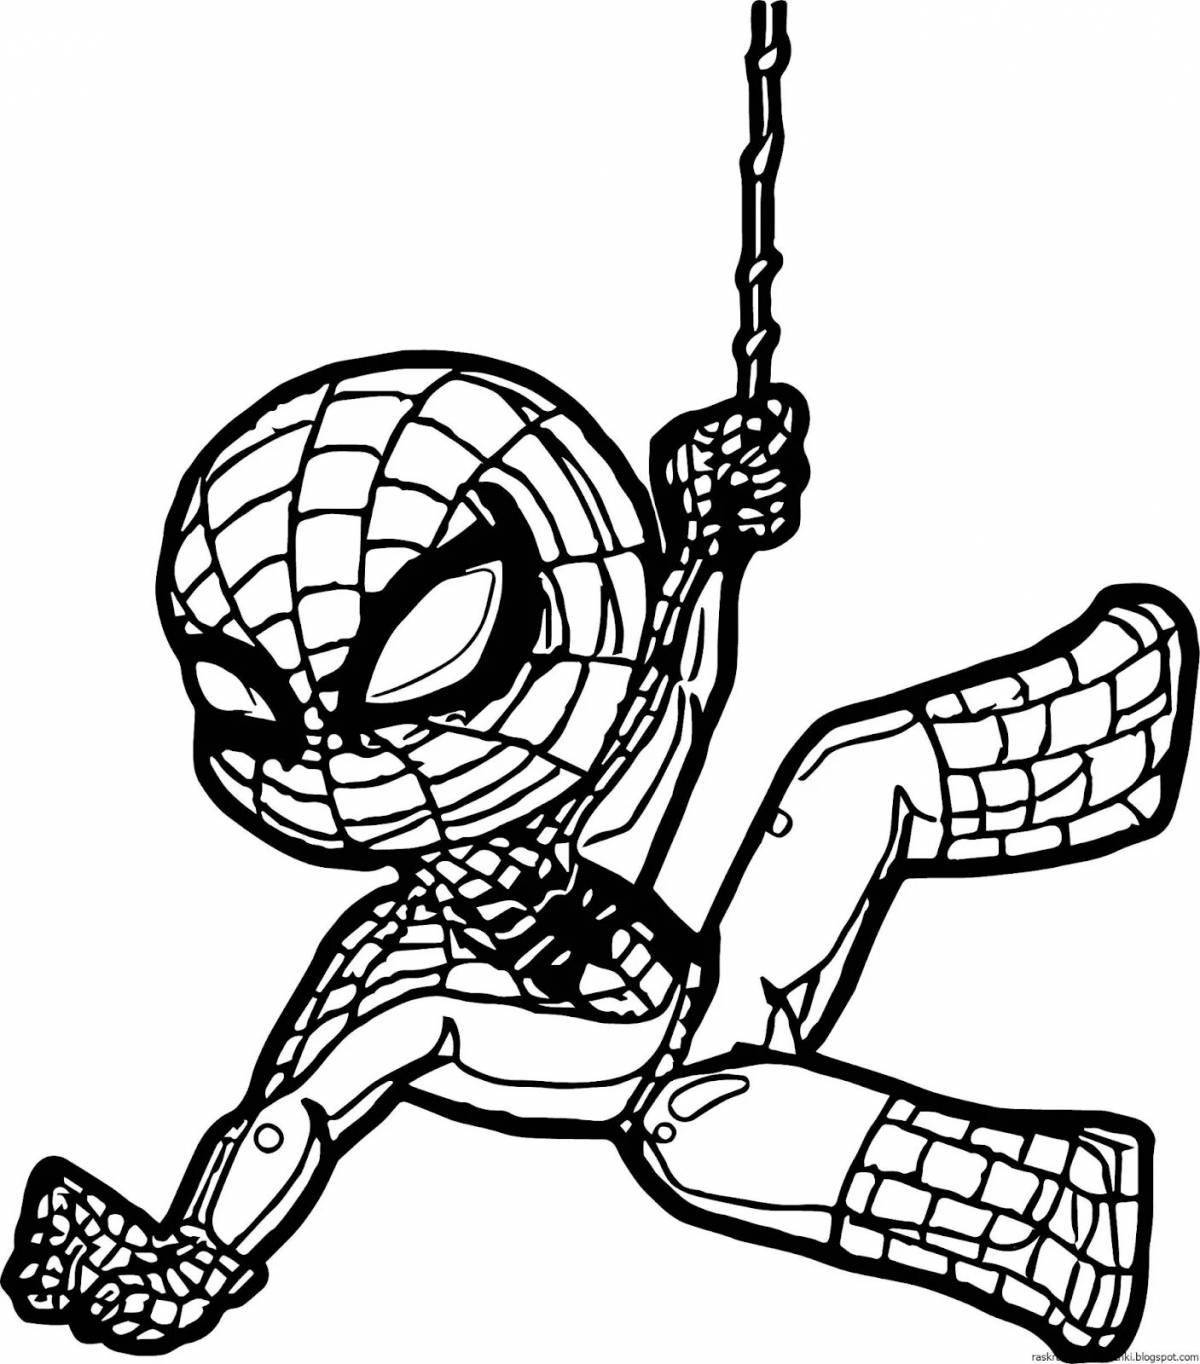 Spiderman spooky ghost coloring page